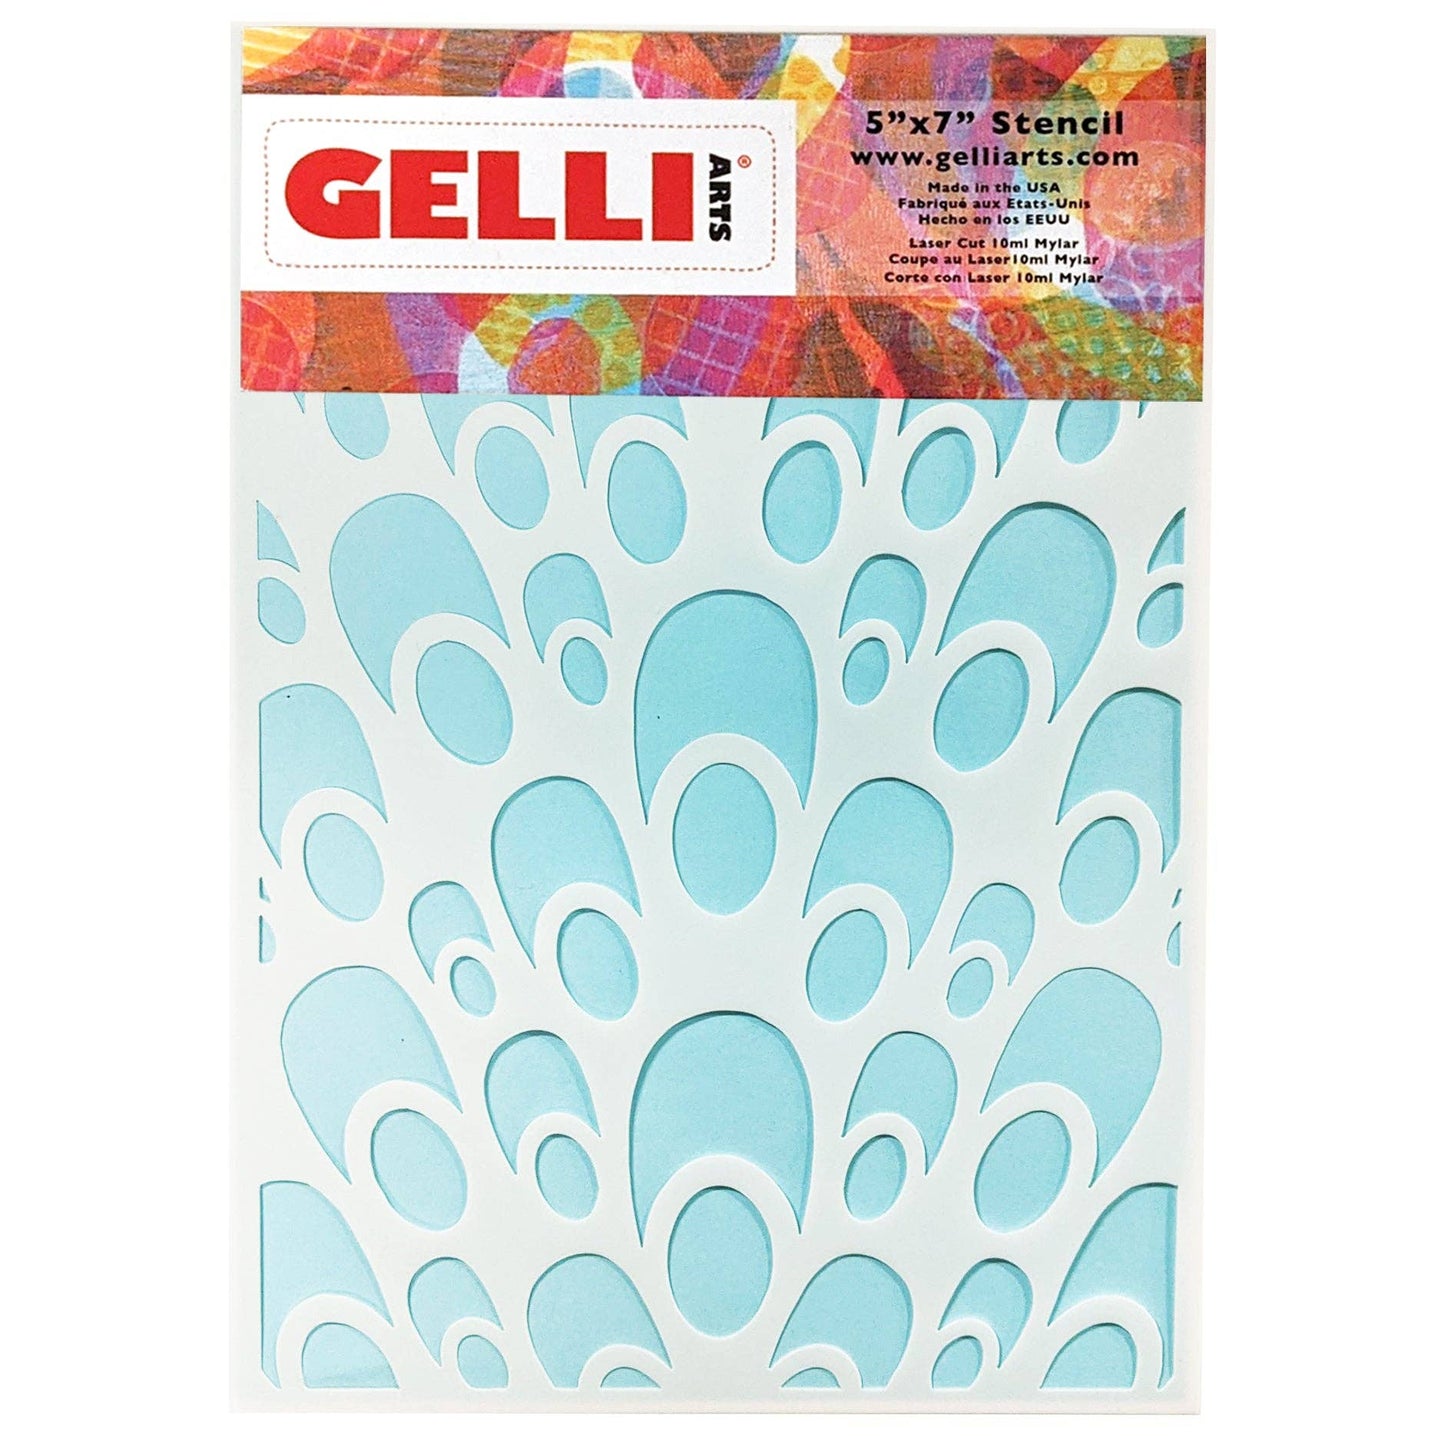 Gelli Arts - NEW Peacock Stencil - Designed to print with 5x7 Gelli Arts® printing plate